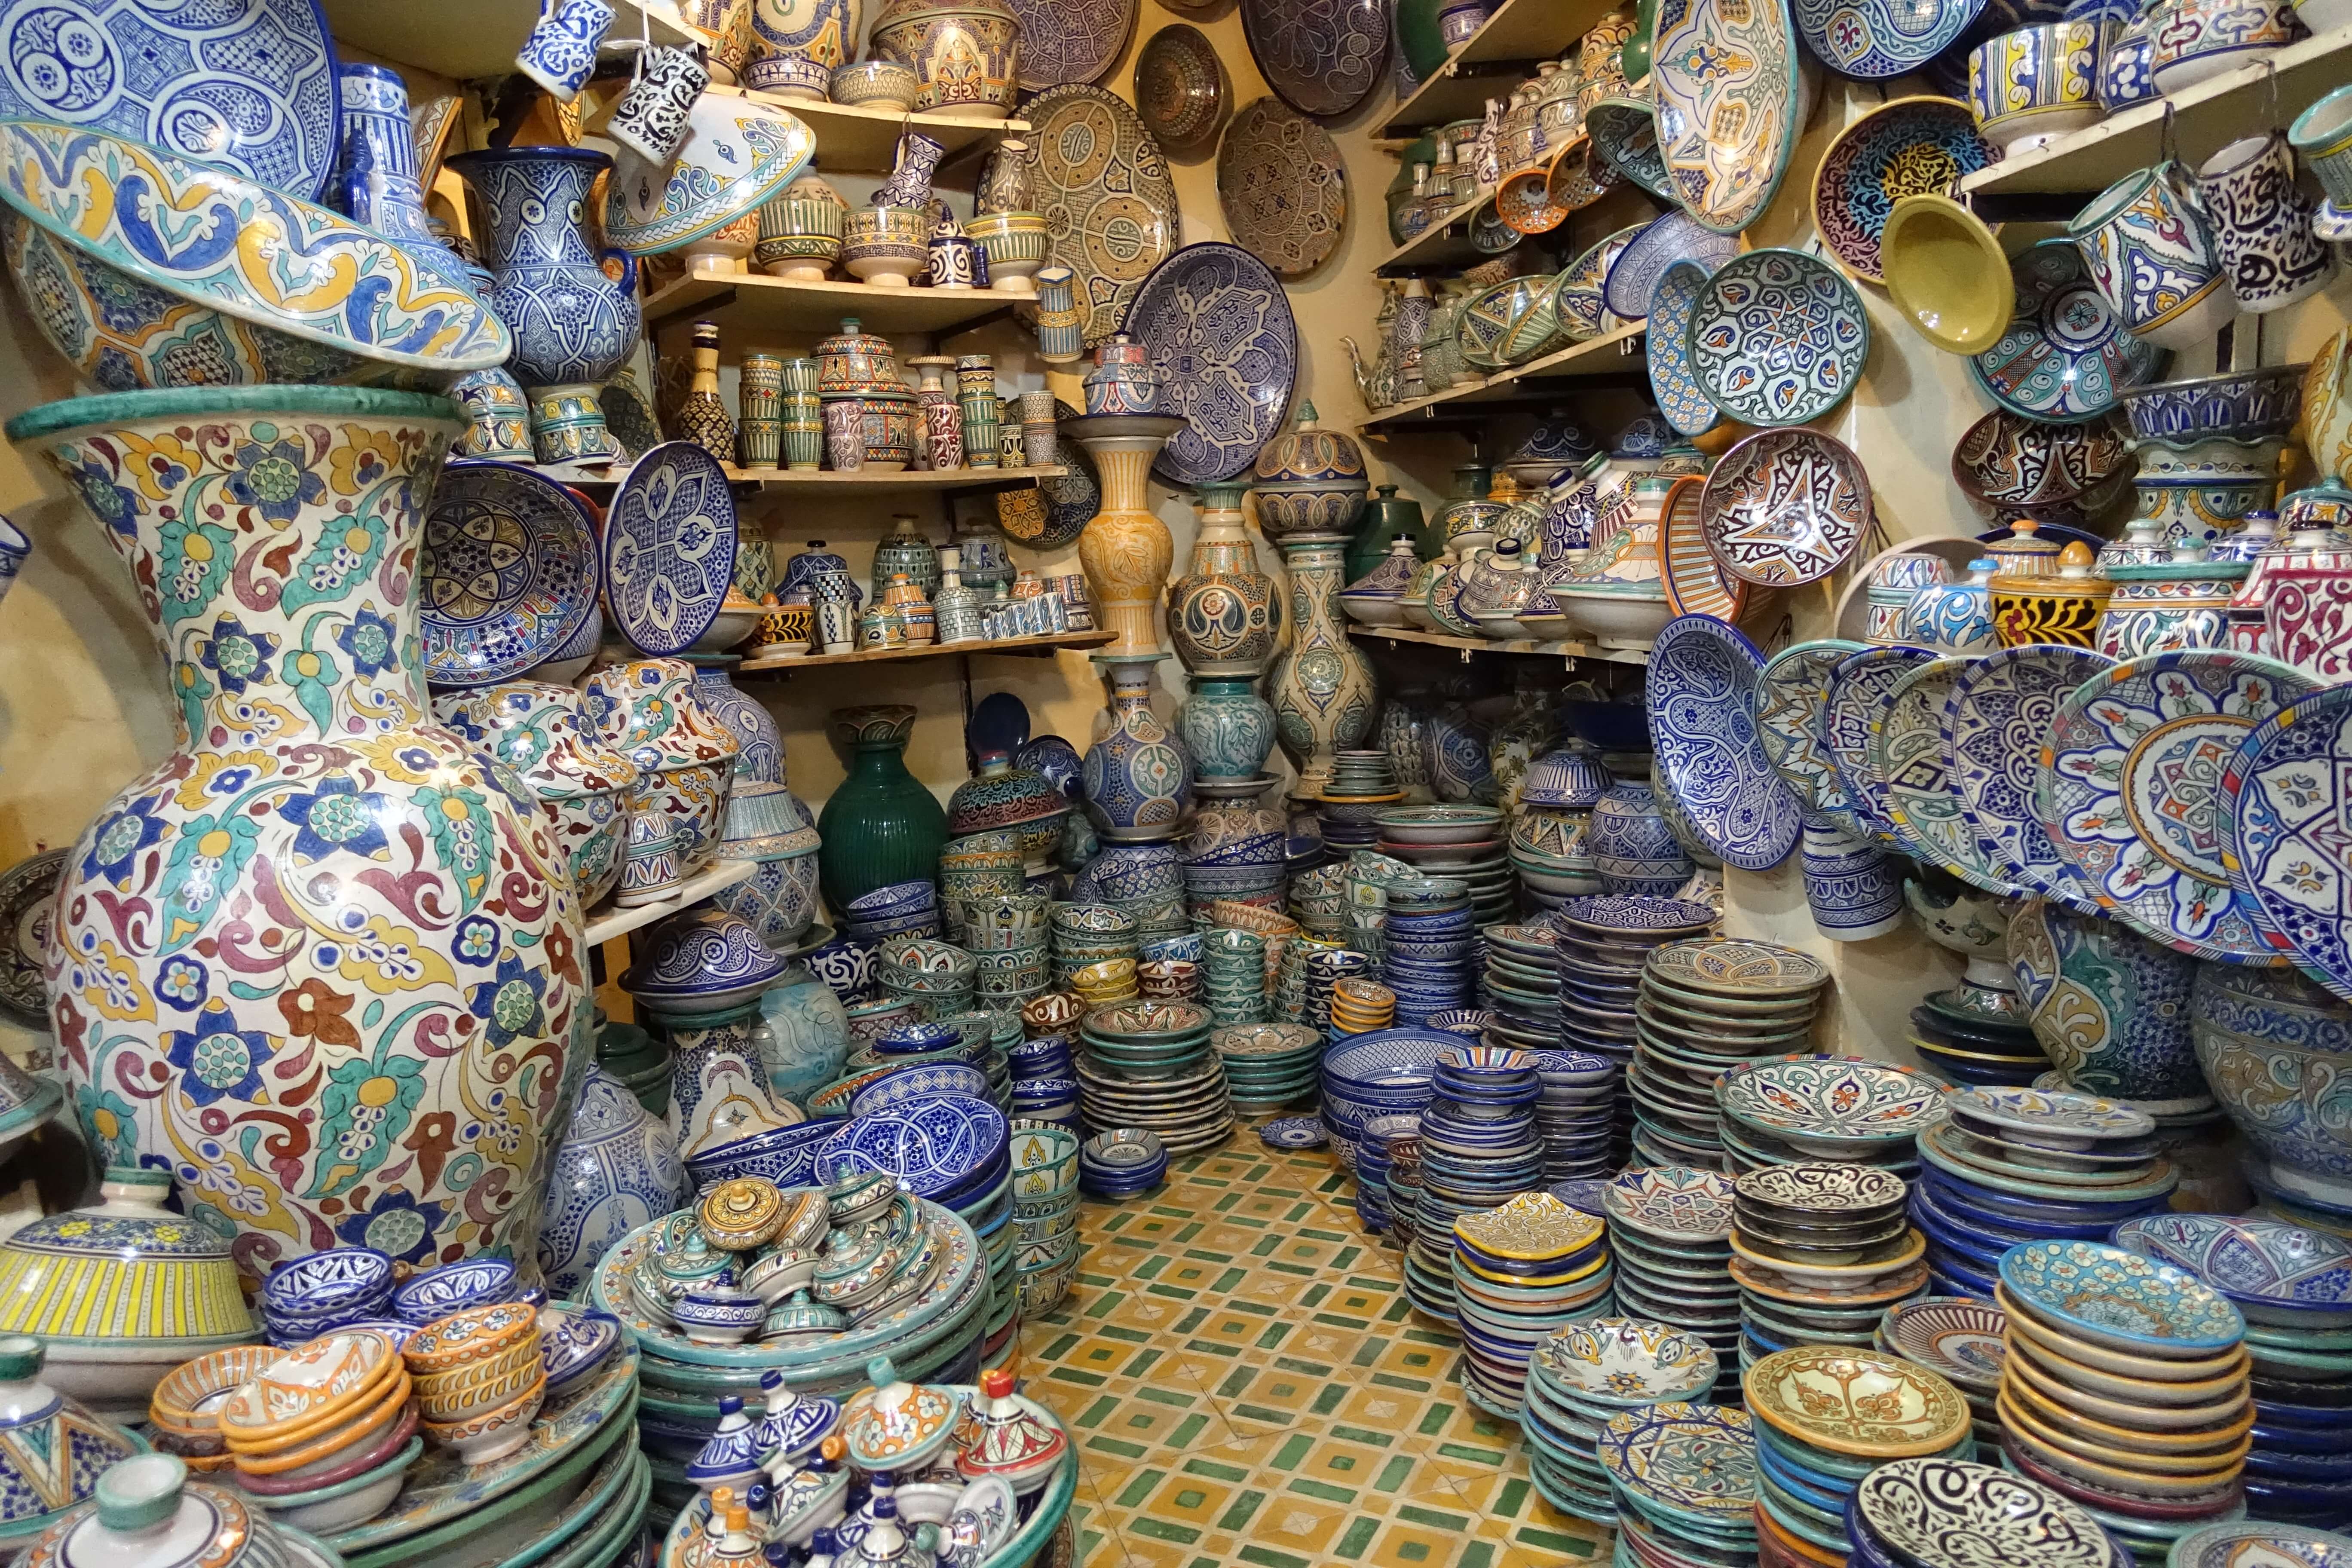 Colorful pottery